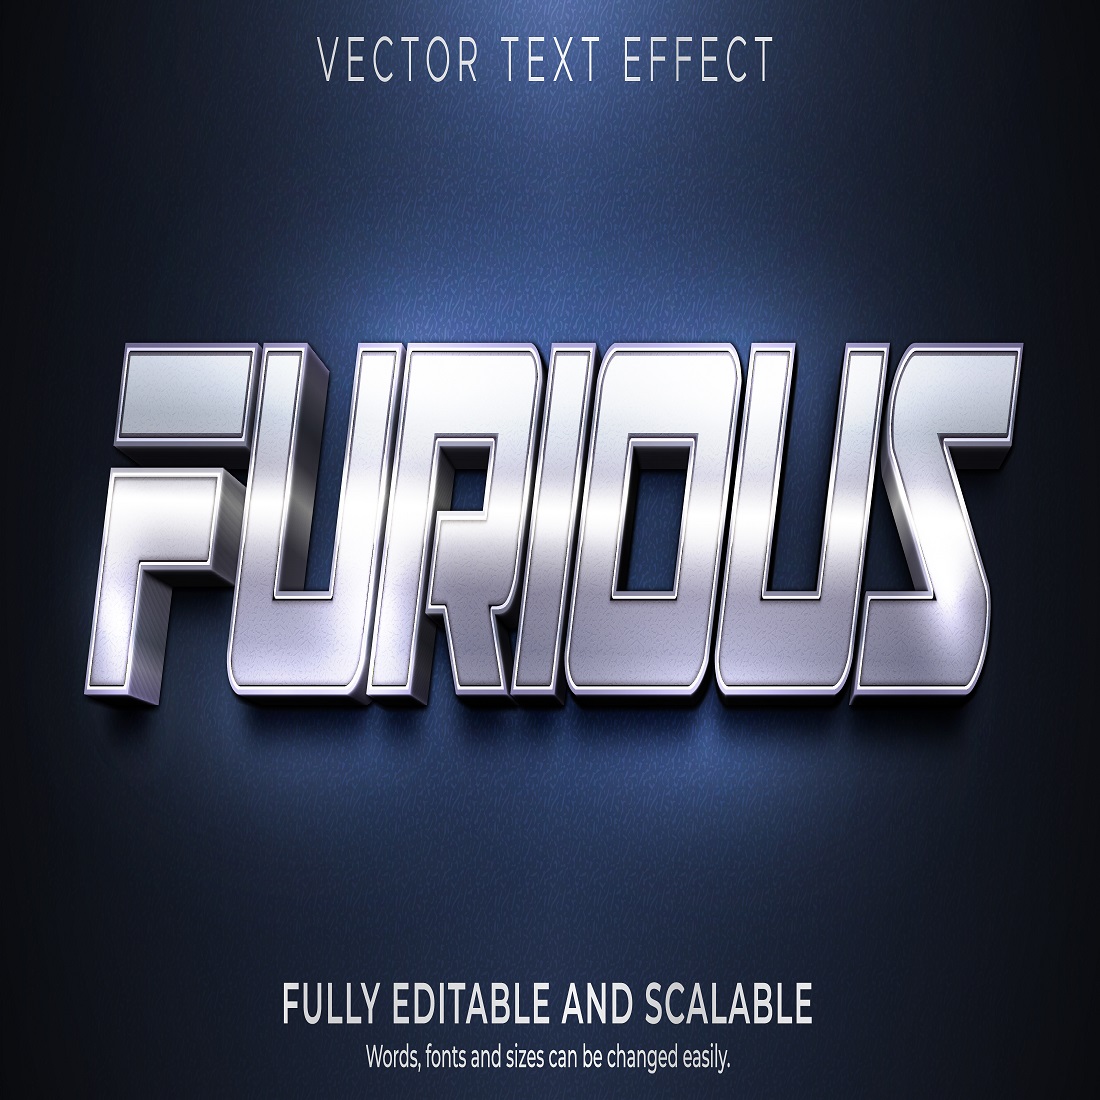 Furious editable text effect metallic shiny text style preview image.